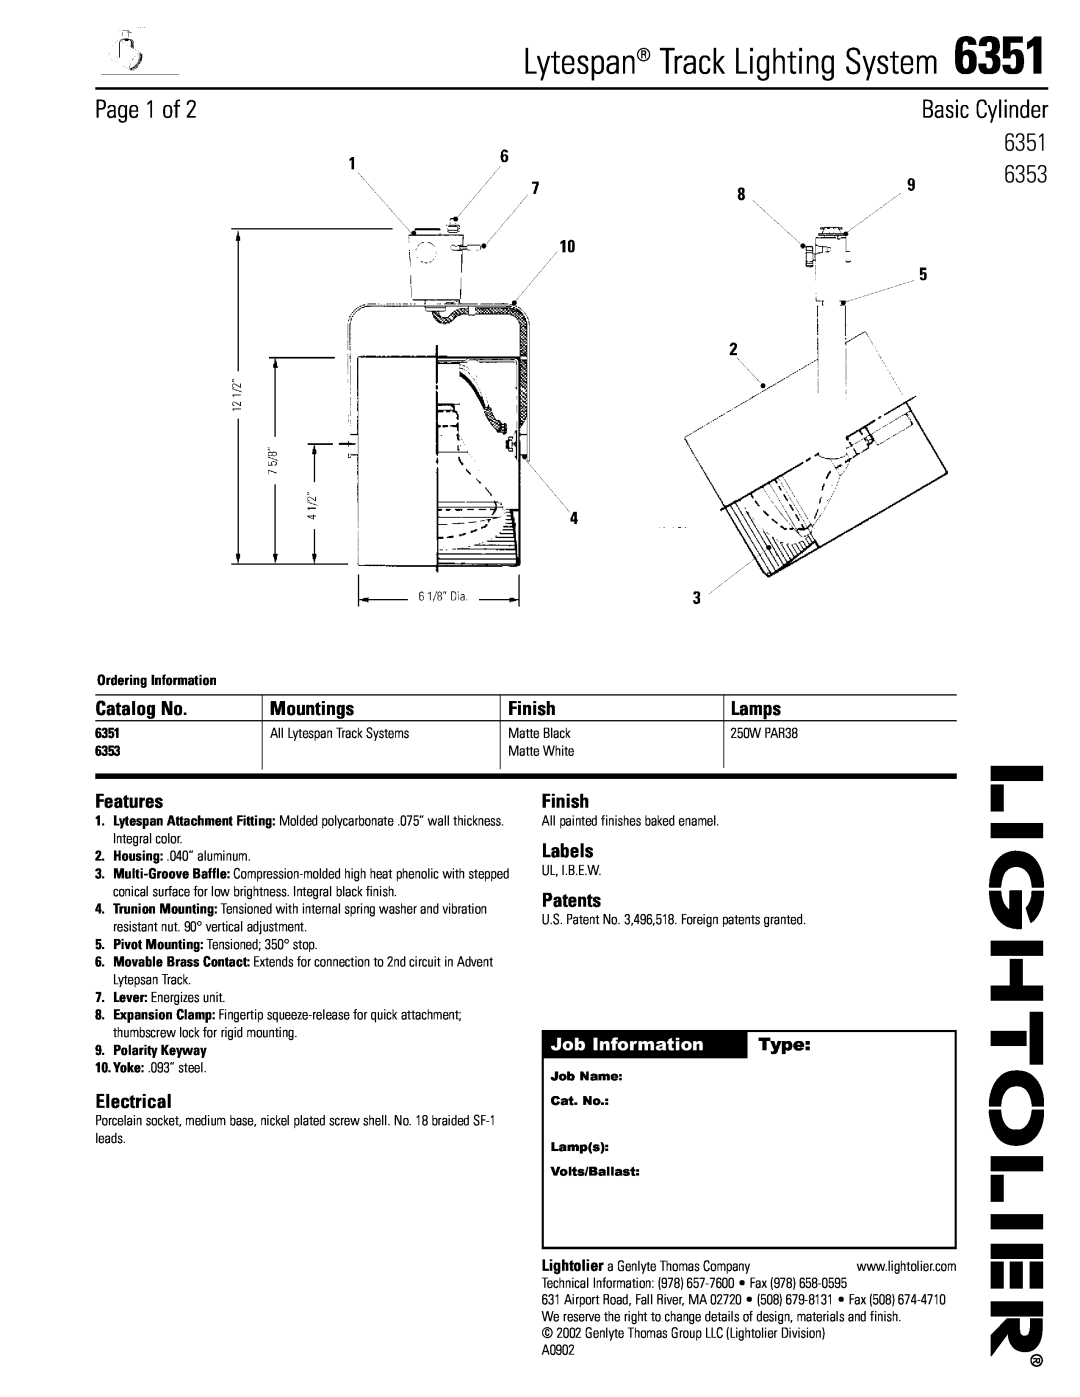 Lightolier 6351 manual Page 1 of, Basic Cylinder, Catalog No, Mountings, Finish, Lamps, Features, Electrical, Labels, Type 